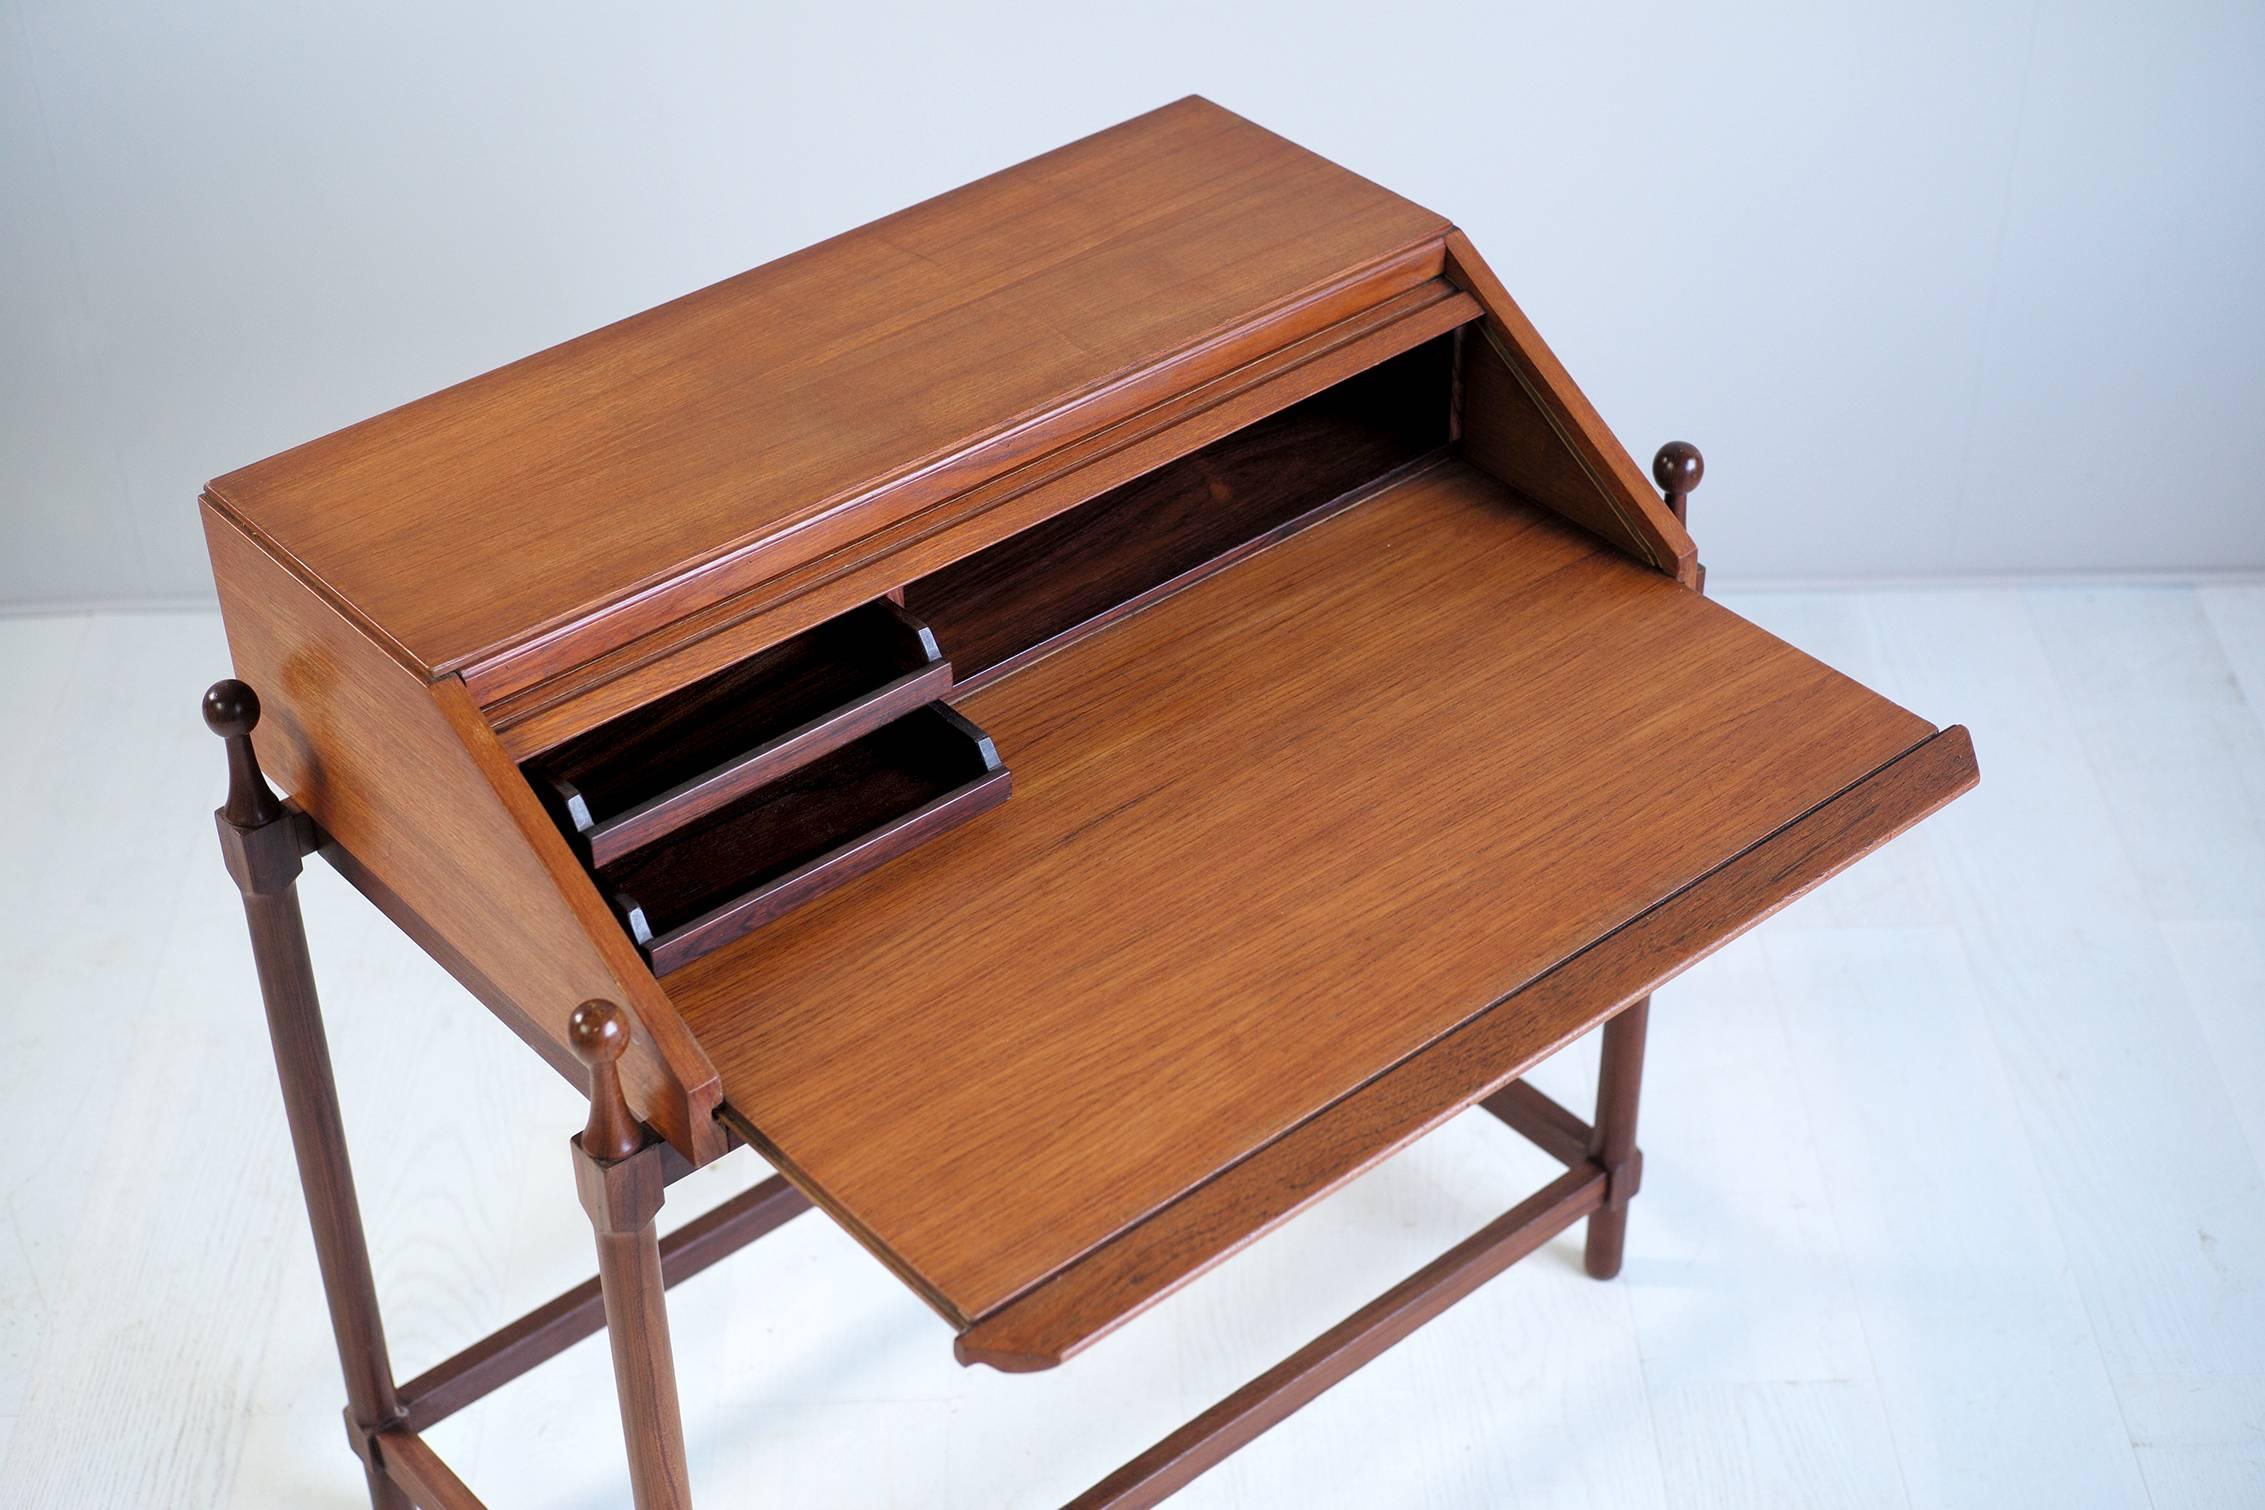 Secretary in teak and rosewood system from Proserpio Fratelli, Italy, 1960. The tablet unfolds revealing the rosewood interior, with two drawers and a housing. Pushing the tray, the curtain comes close the box. The pillar base is in solid